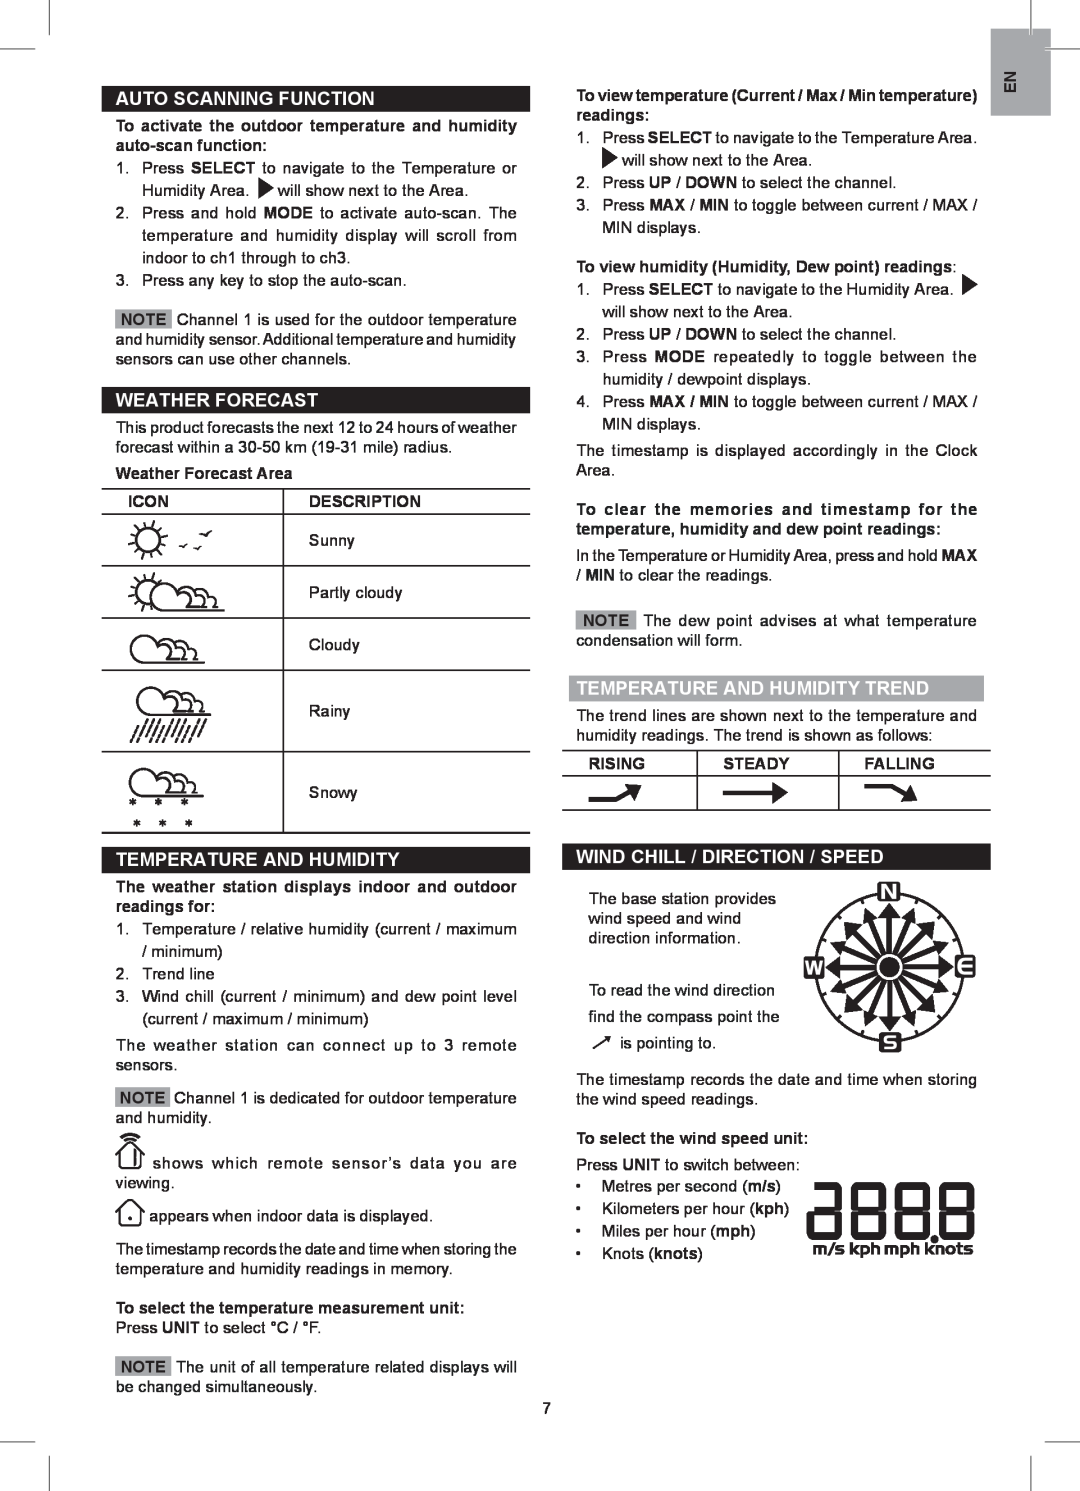 Oregon Scientific WMR88A user manual Auto Scanning Function, Weather Forecast, Temperature And Humidity 